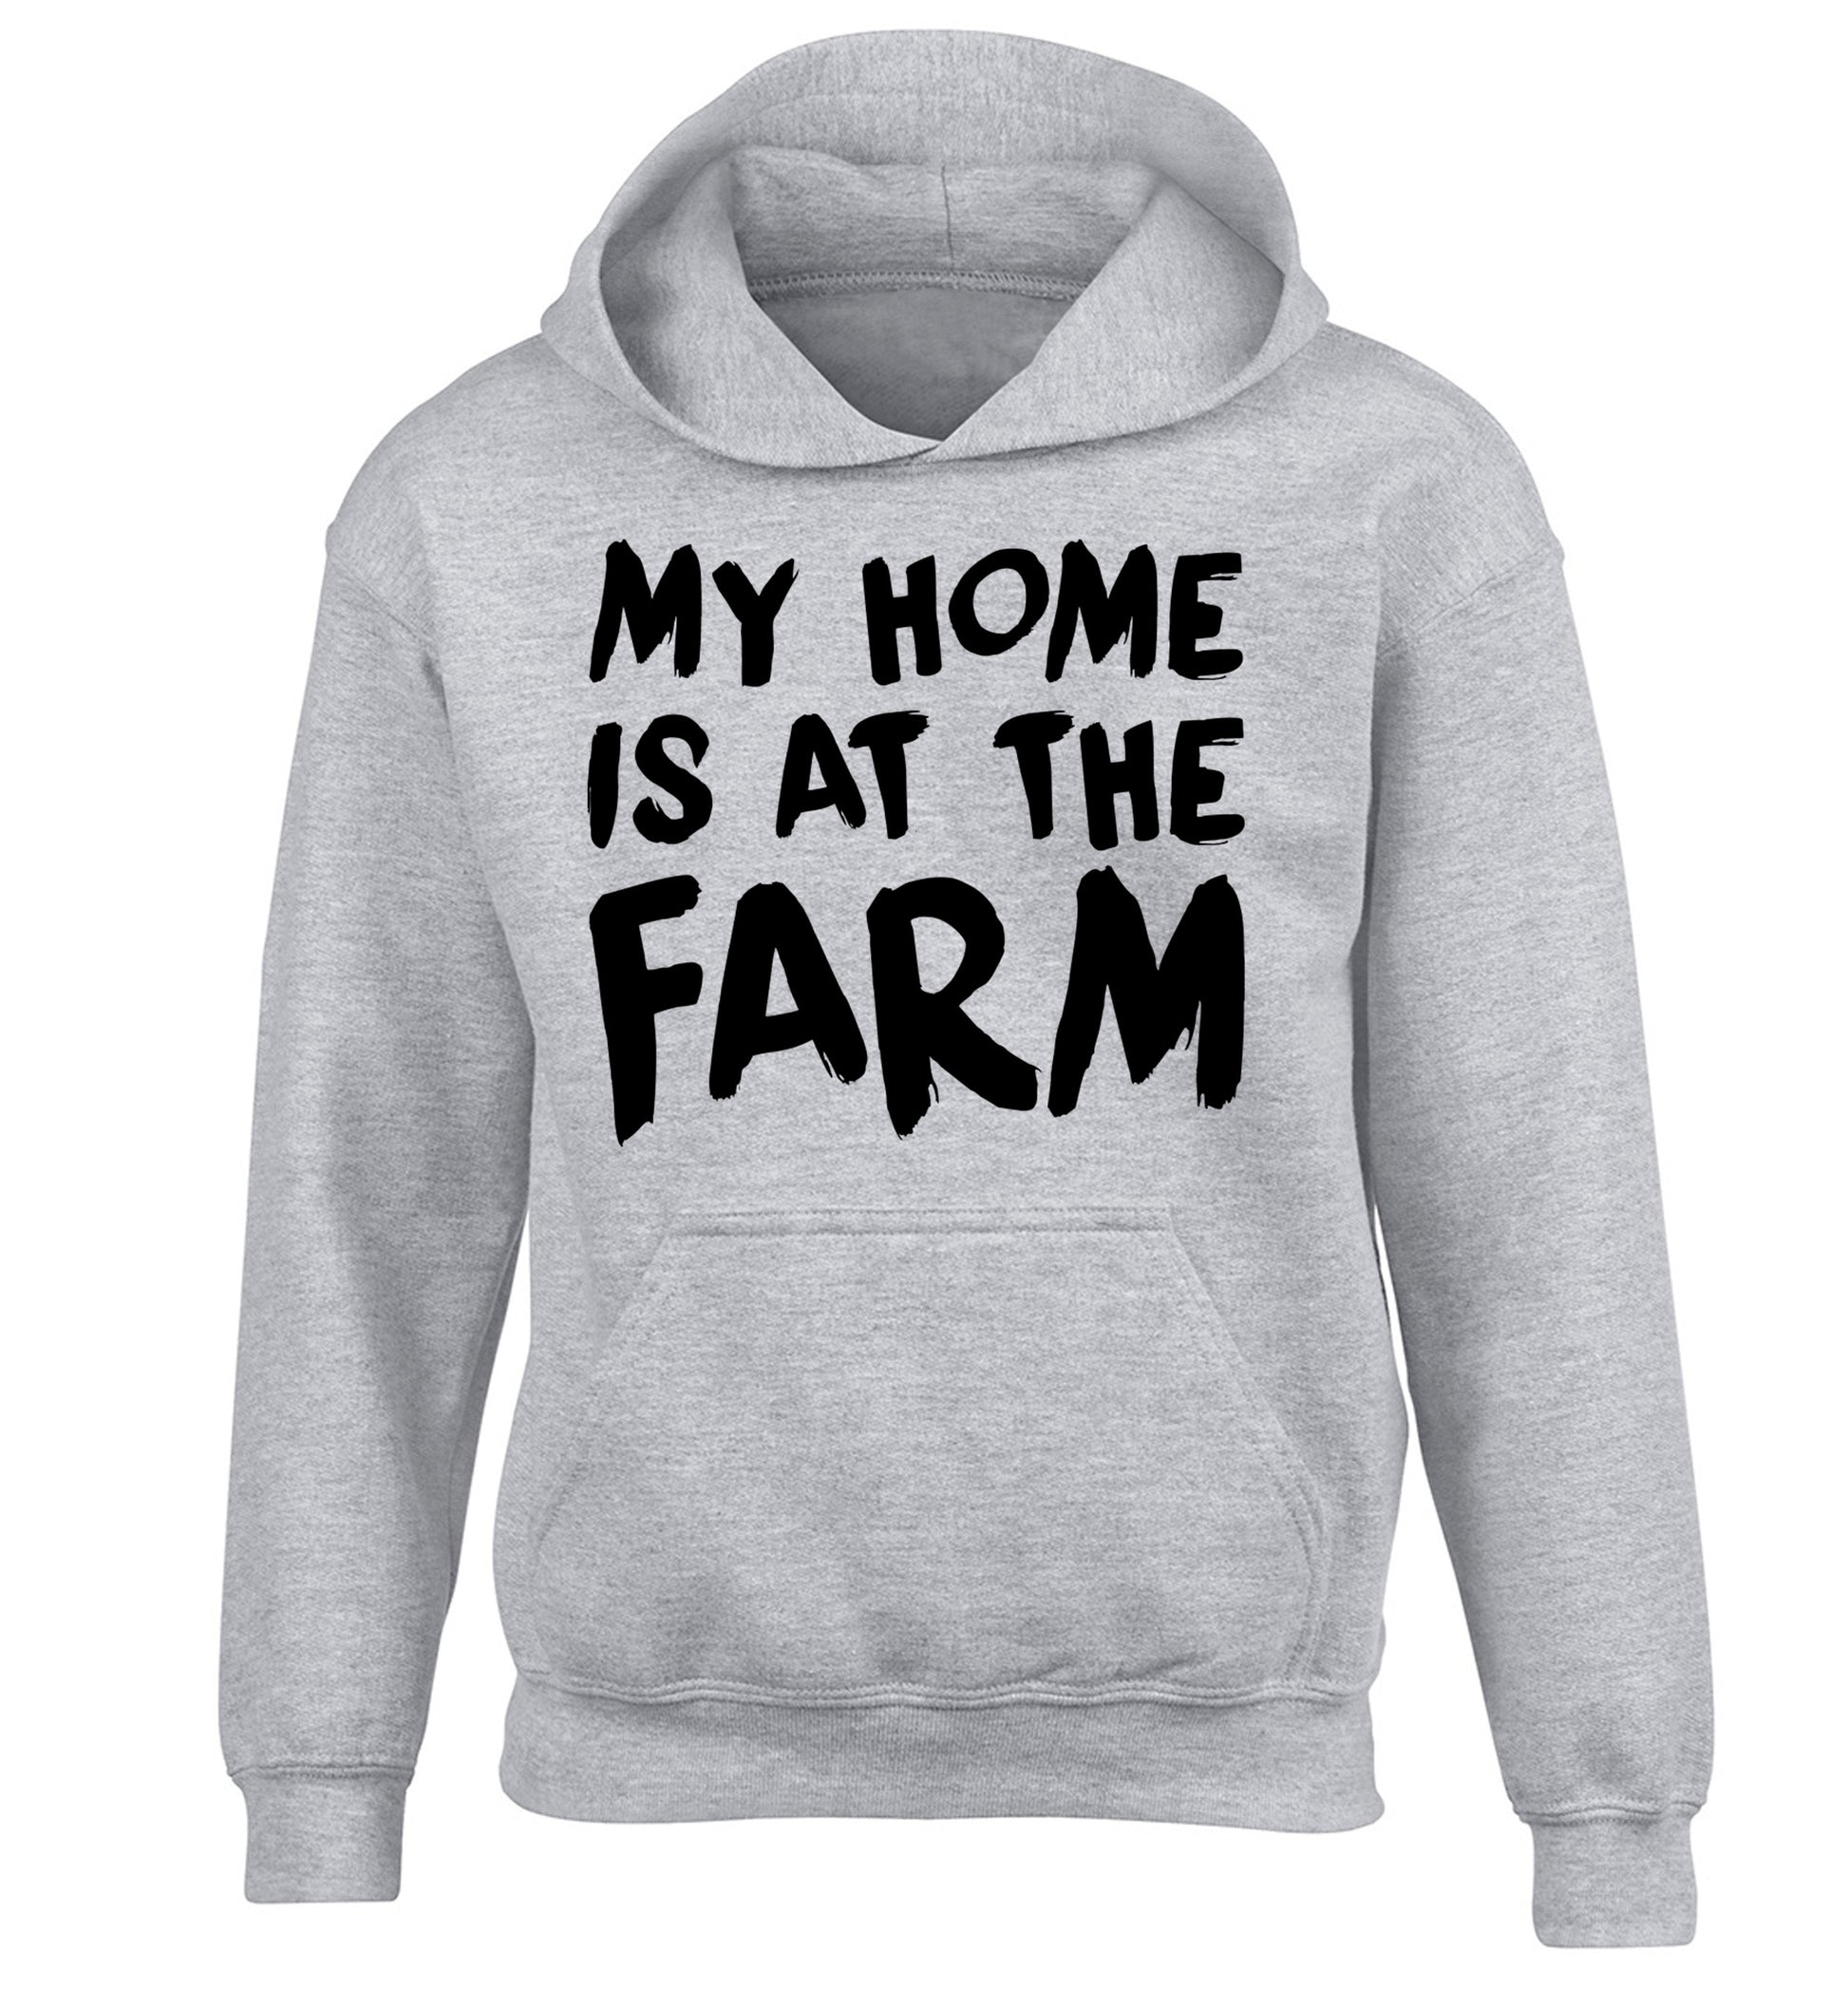 My home is at the farm children's grey hoodie 12-14 Years